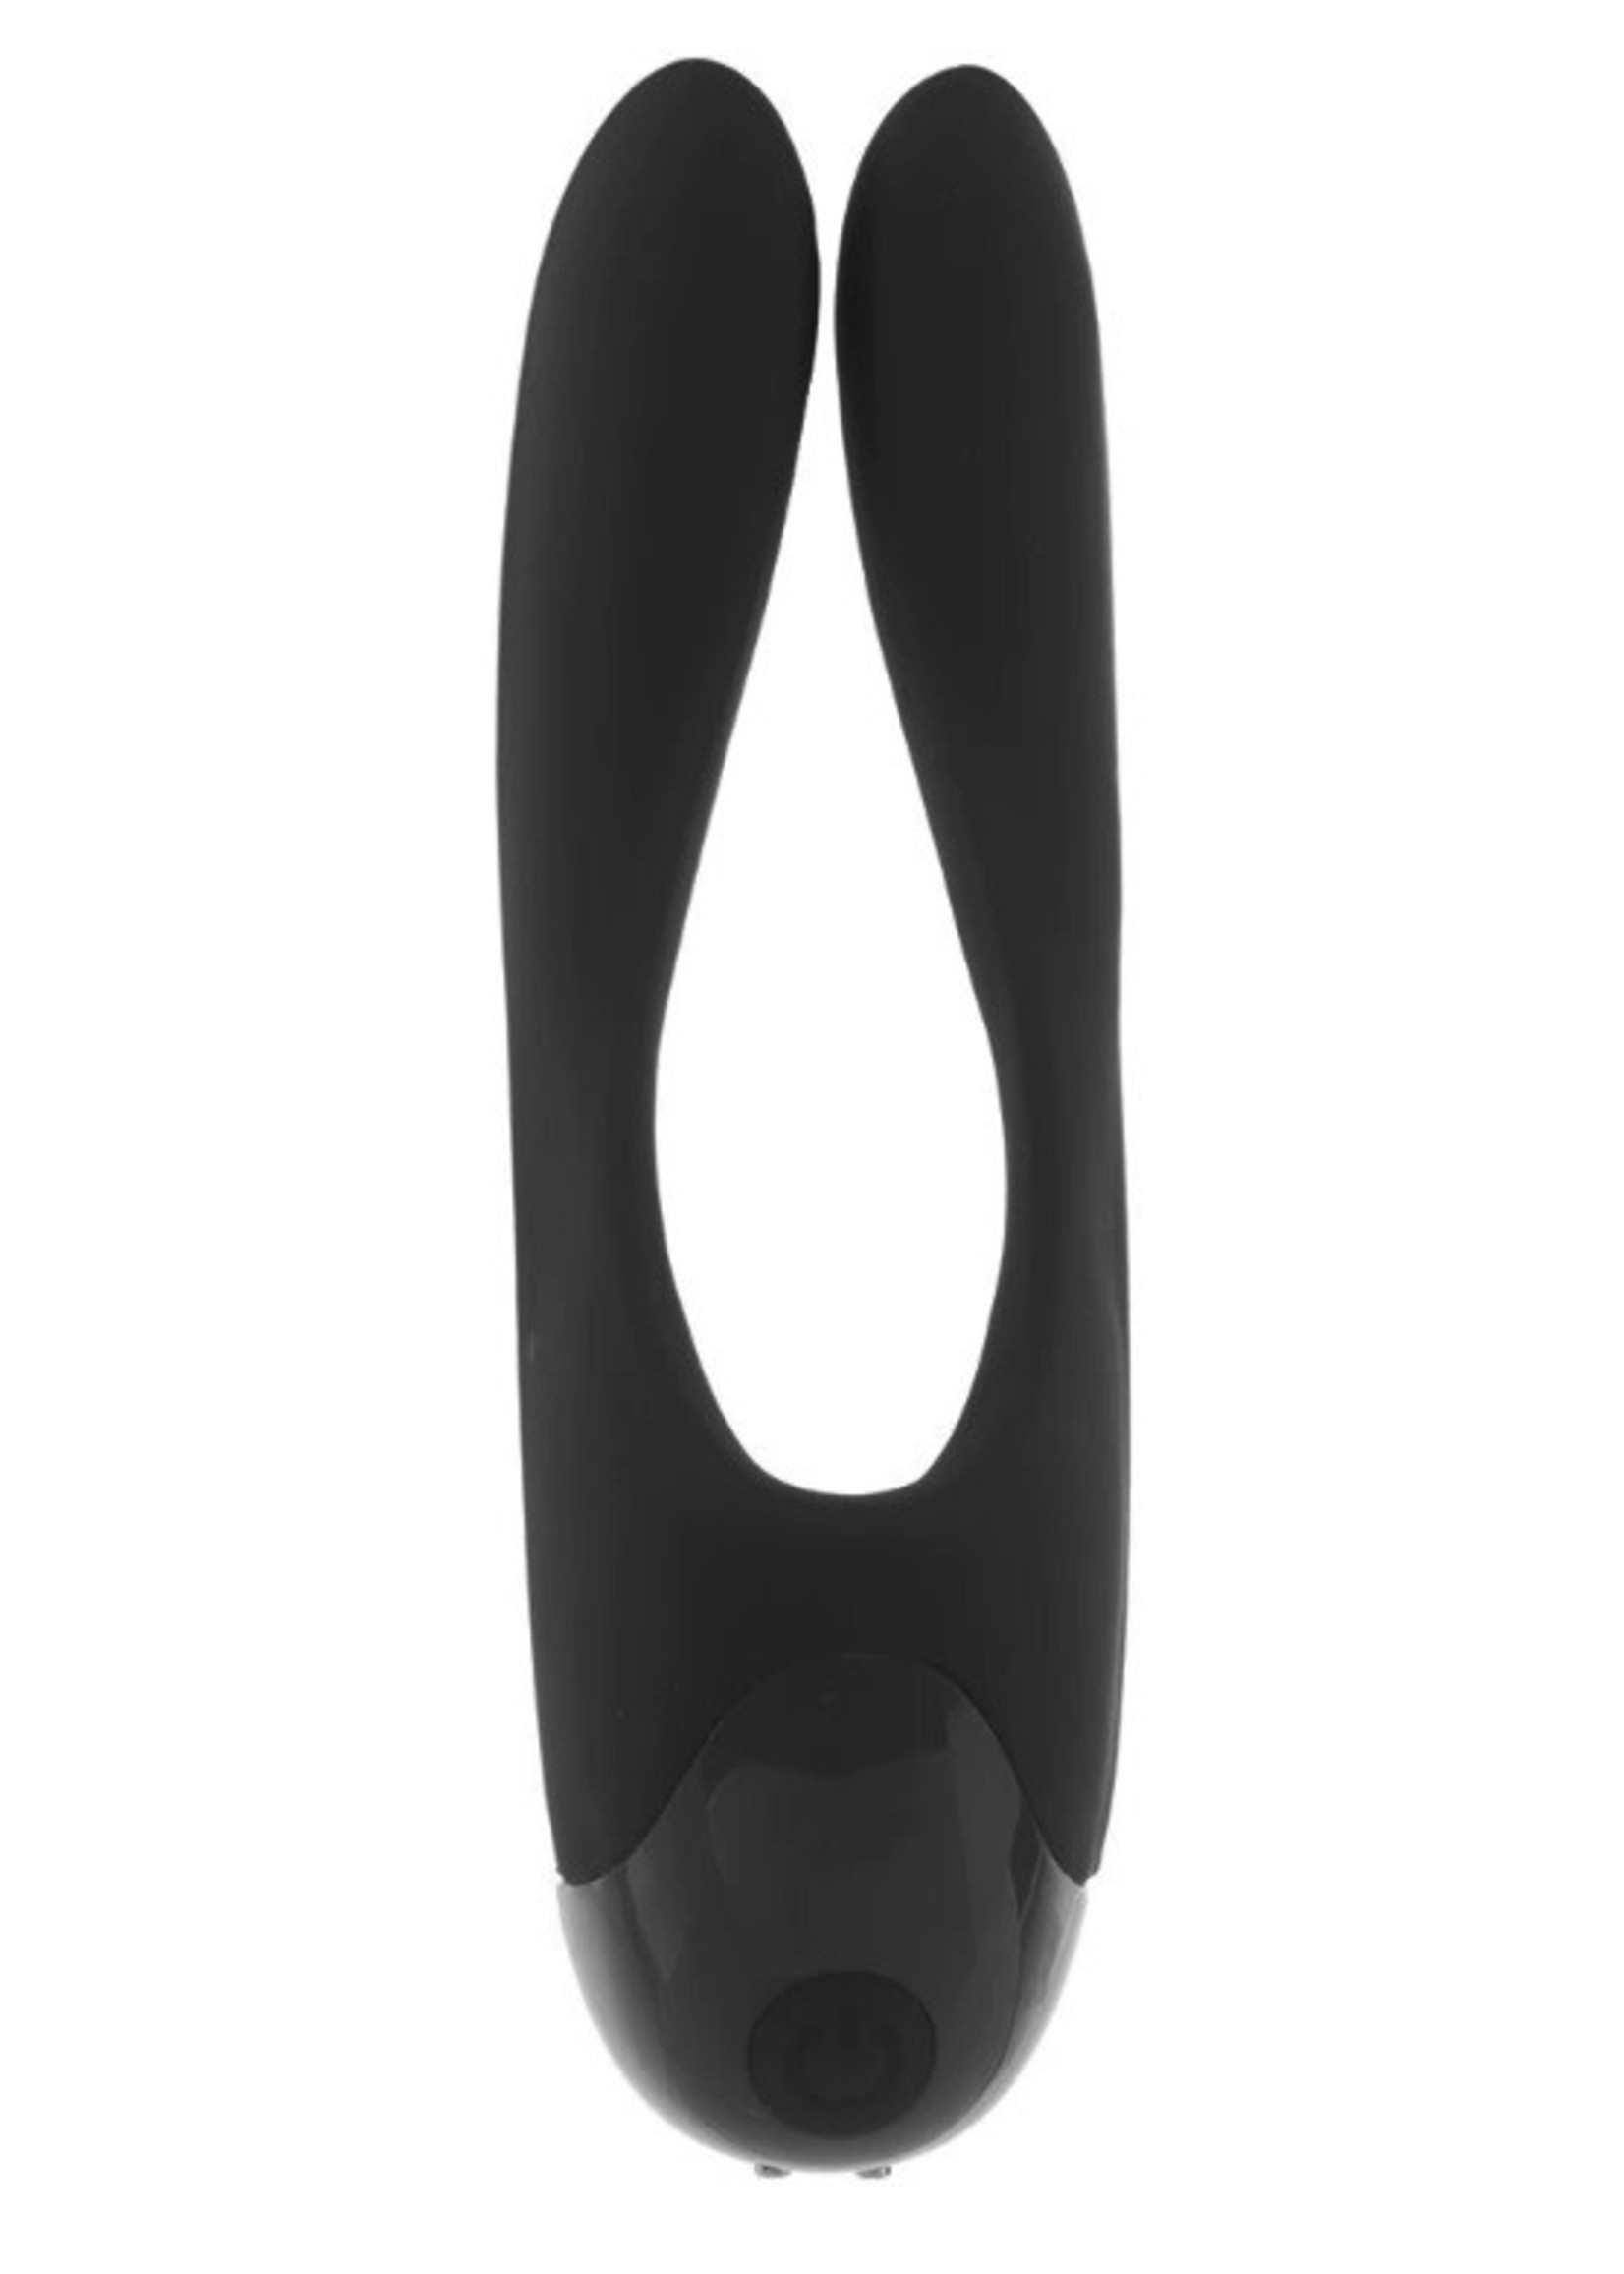 Satisfyer Candy Cane Vibe in Black